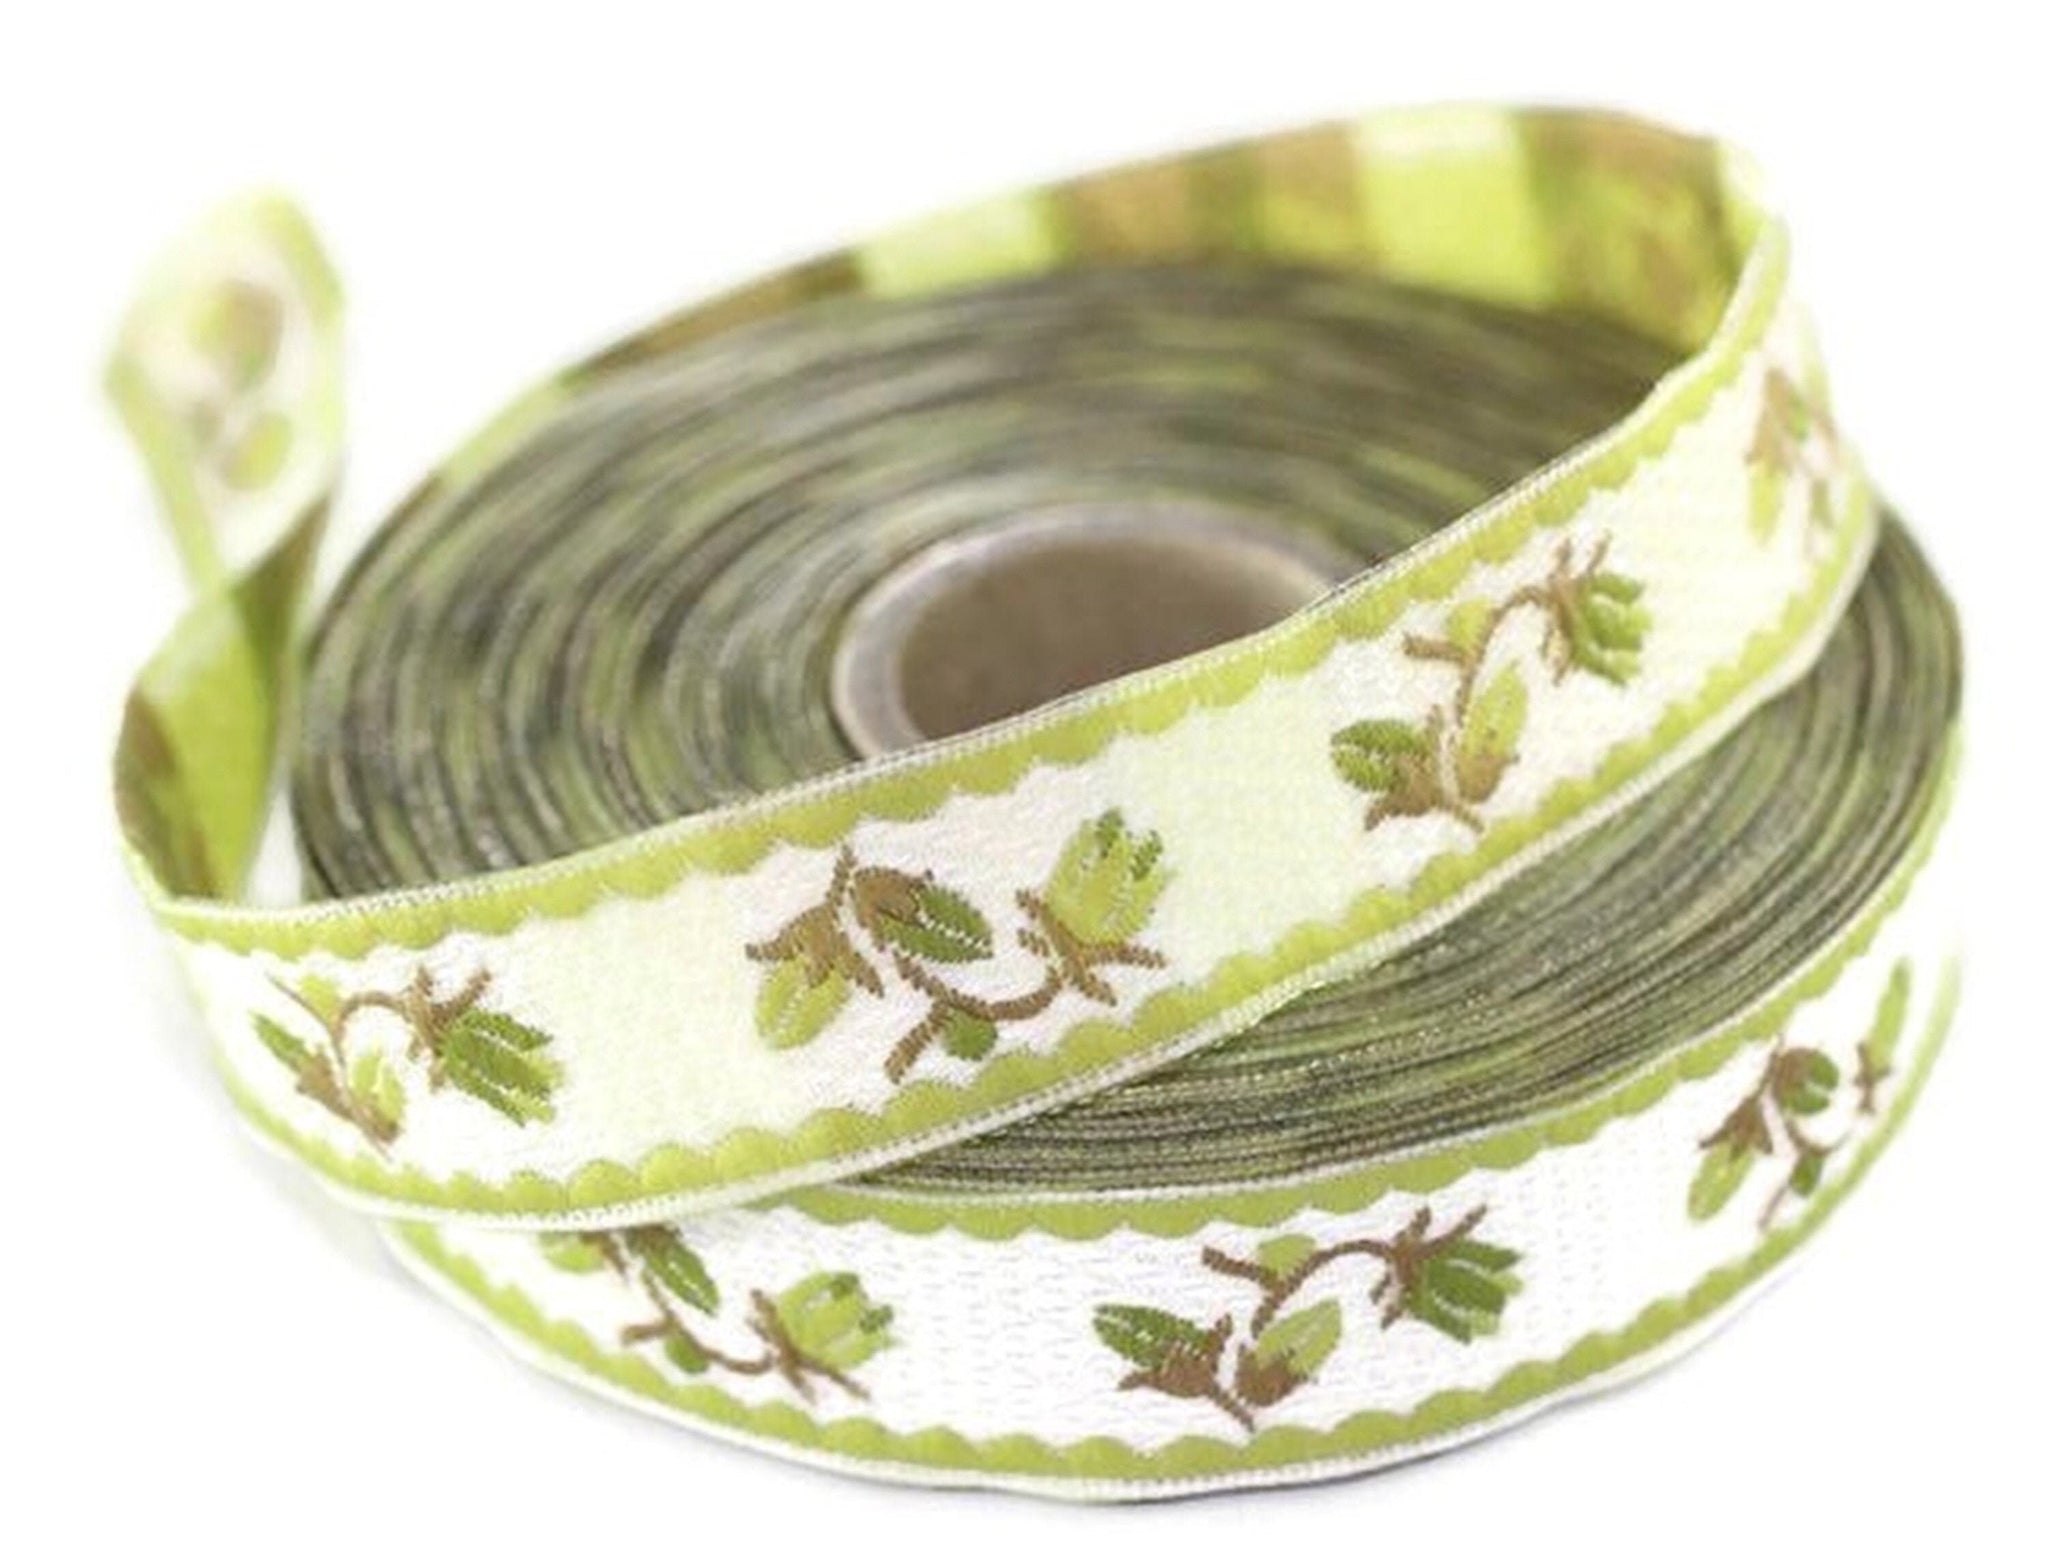 35 mm Green&white floral Jacquard ribbons (1.37 inches), jacquard trim, Decorative Craft Ribbon, Sewing trim, embroidered ribbon